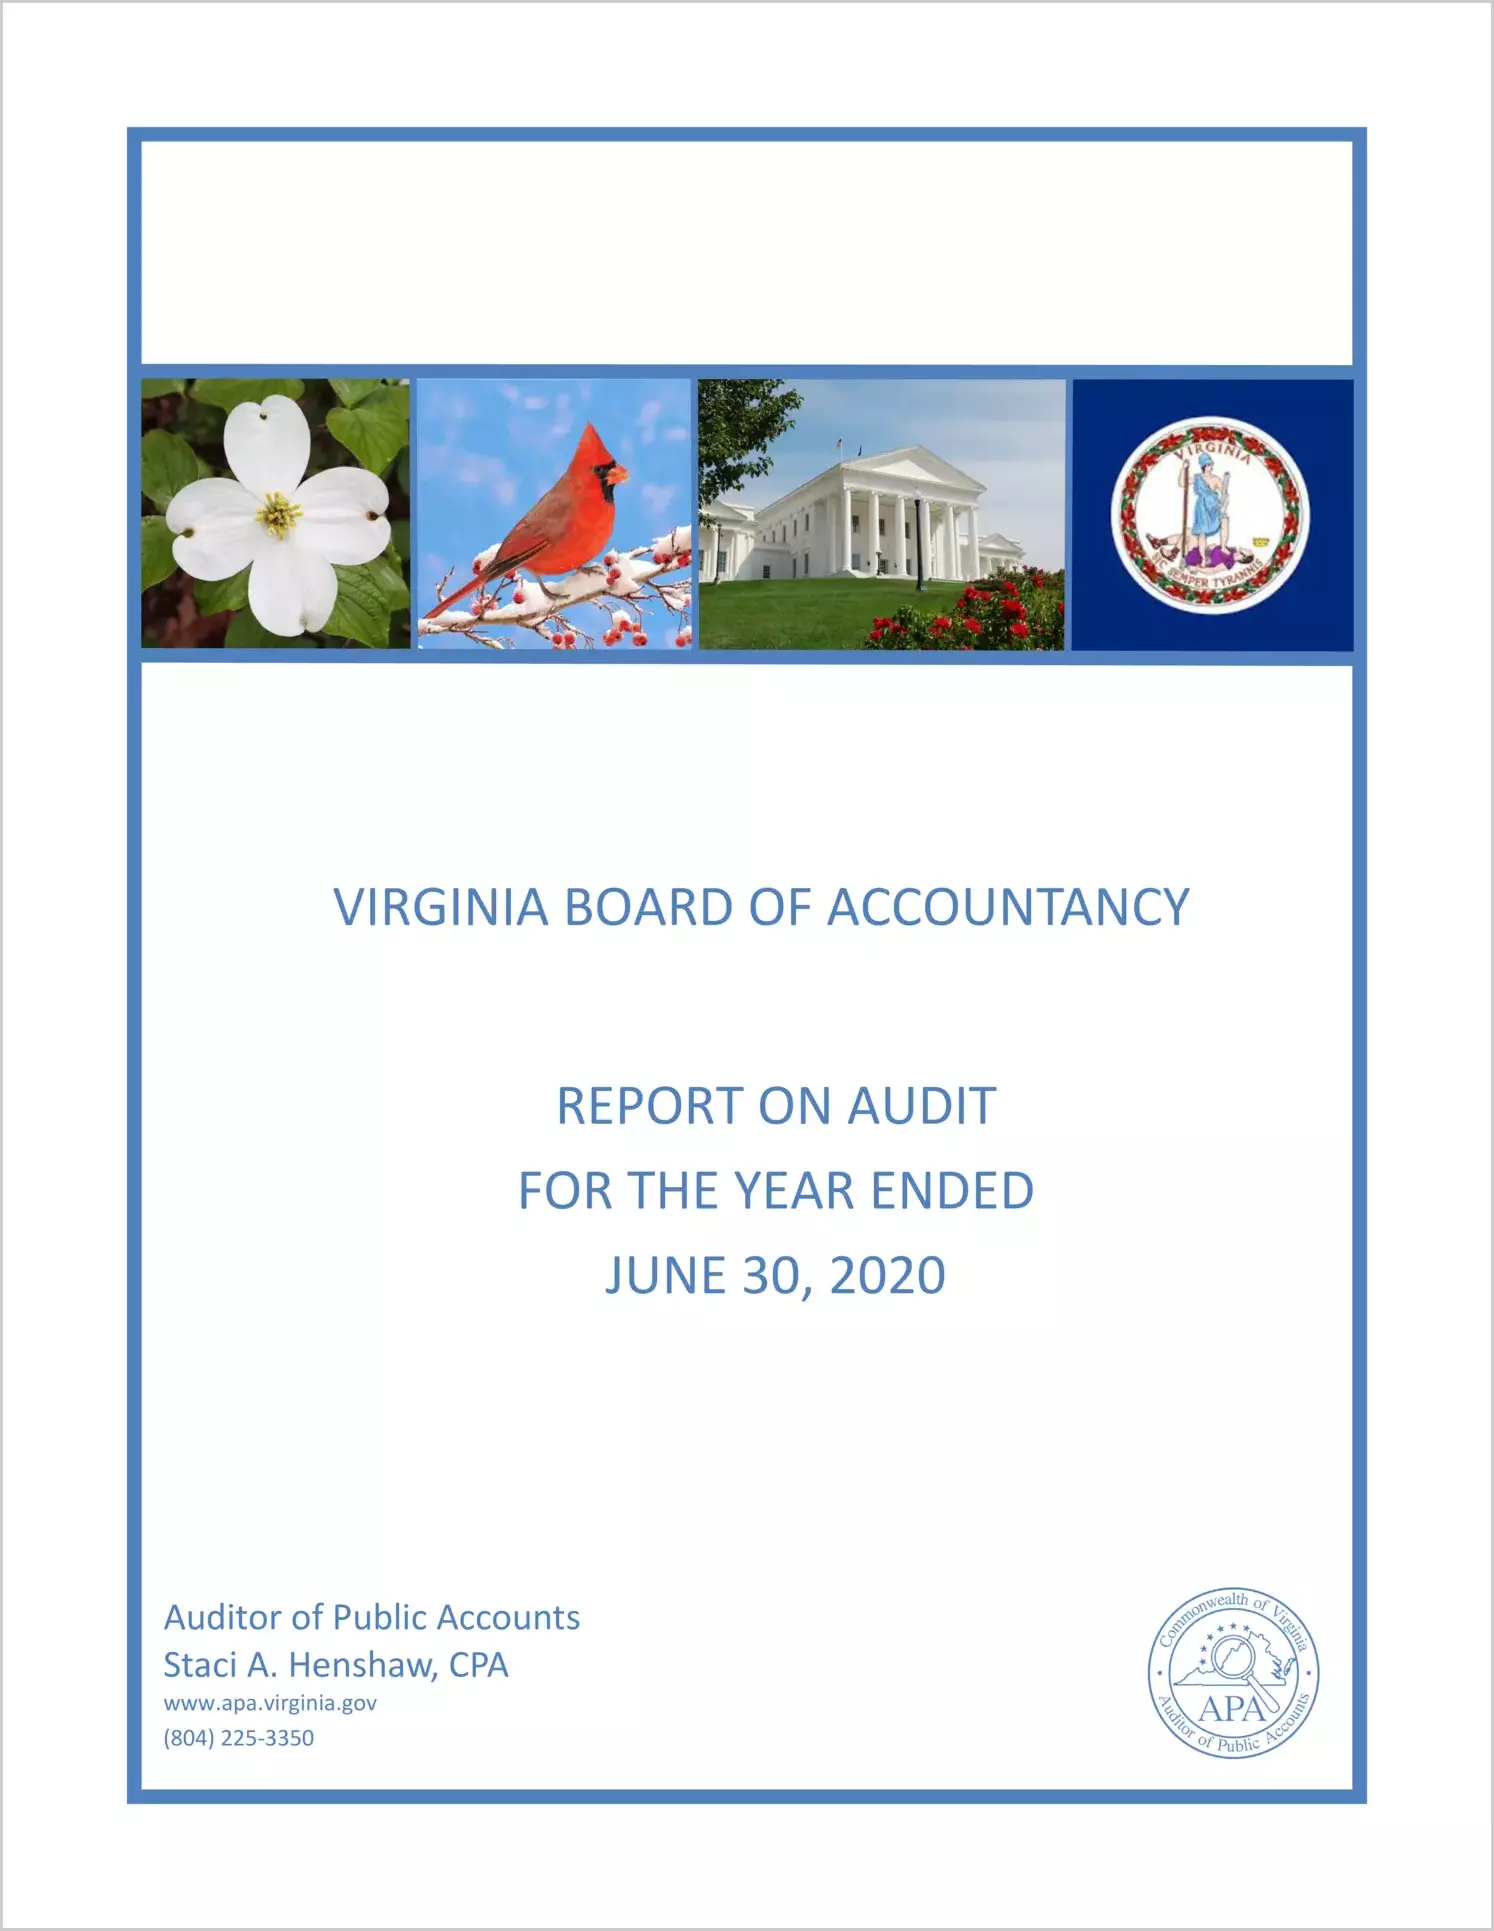 Virginia Board of Accountancy for the year ended June 30, 2020